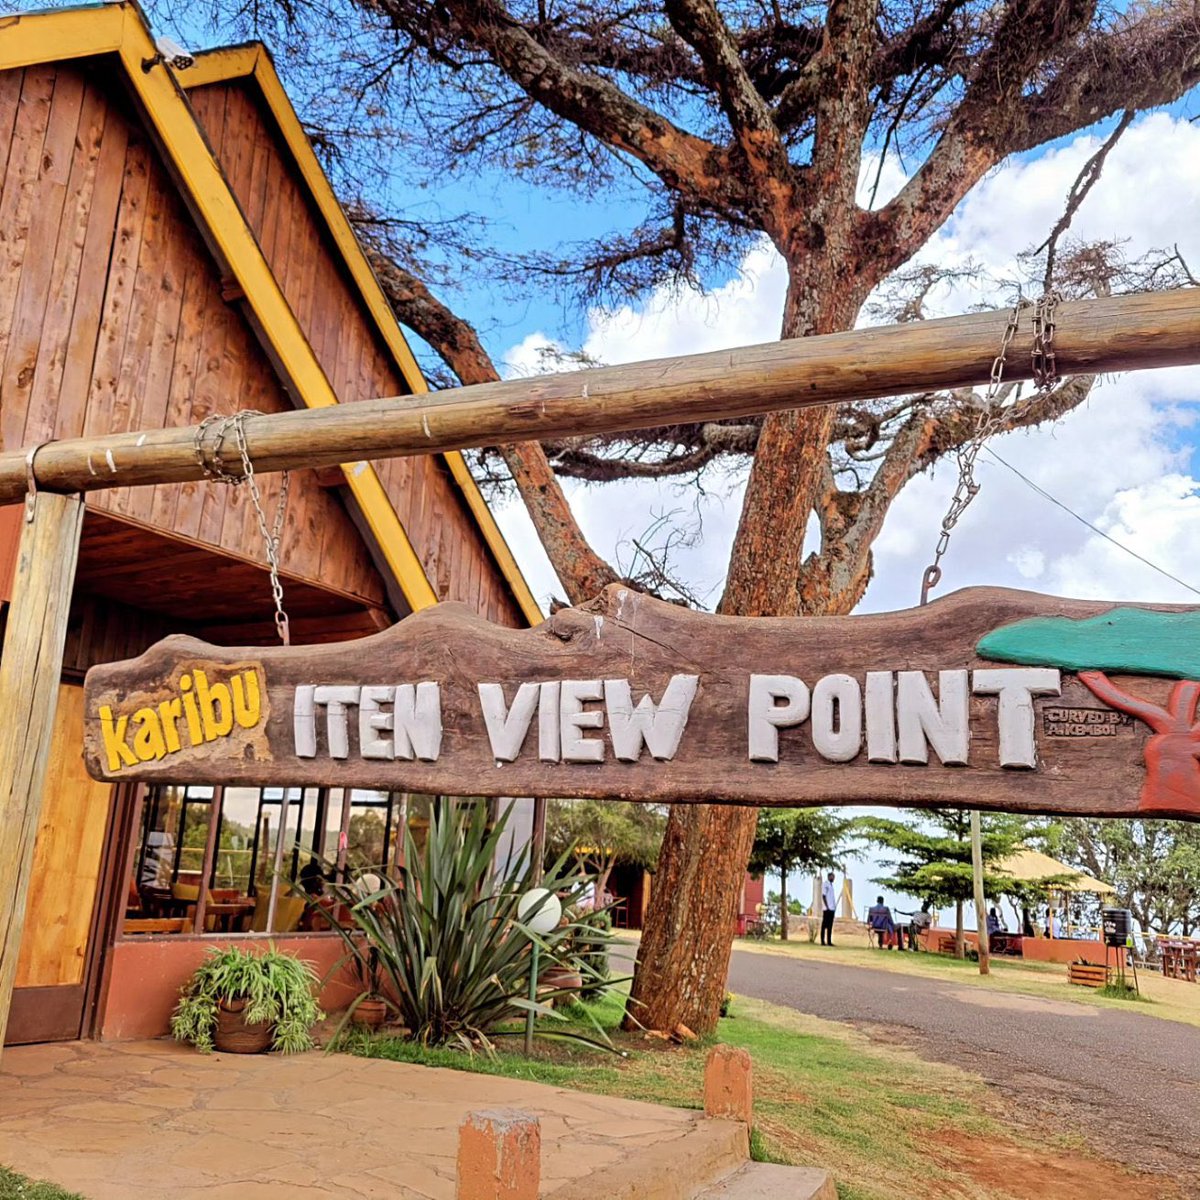 The only place you can take your partner in Eldoret. My Eldoret folks will agree.